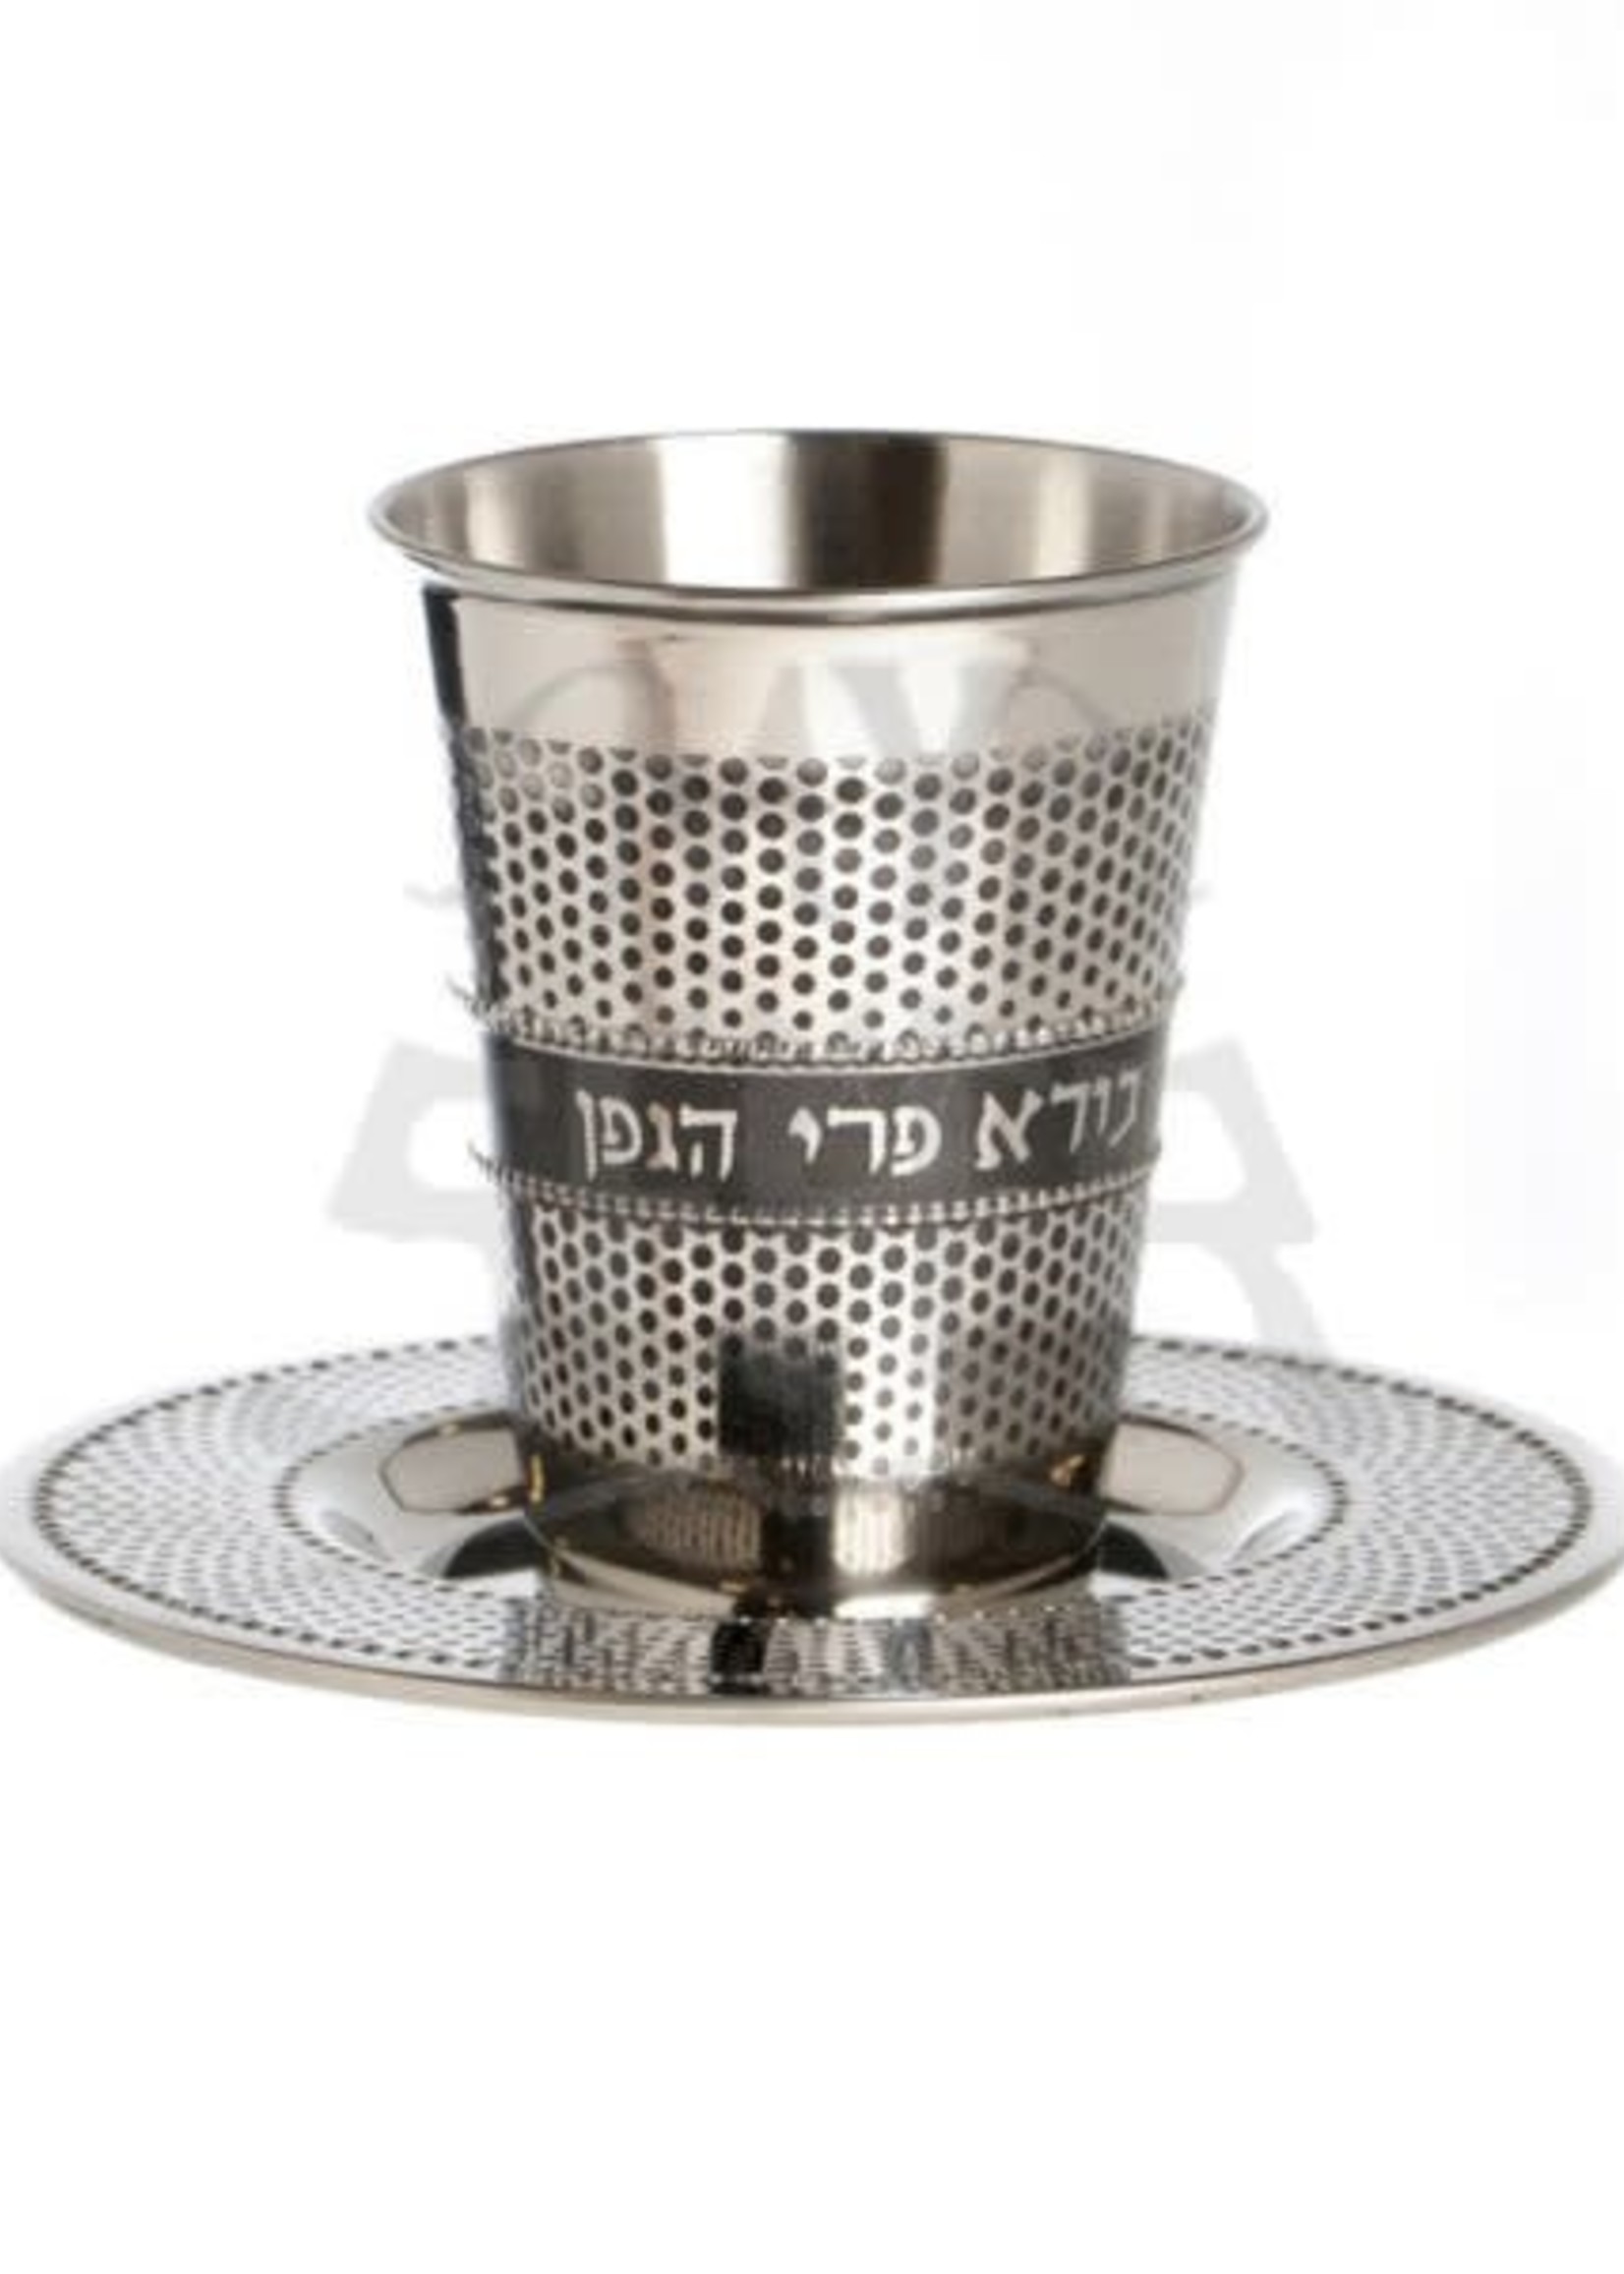 Stainless Steel Kiddush Cup Set-Dots Design